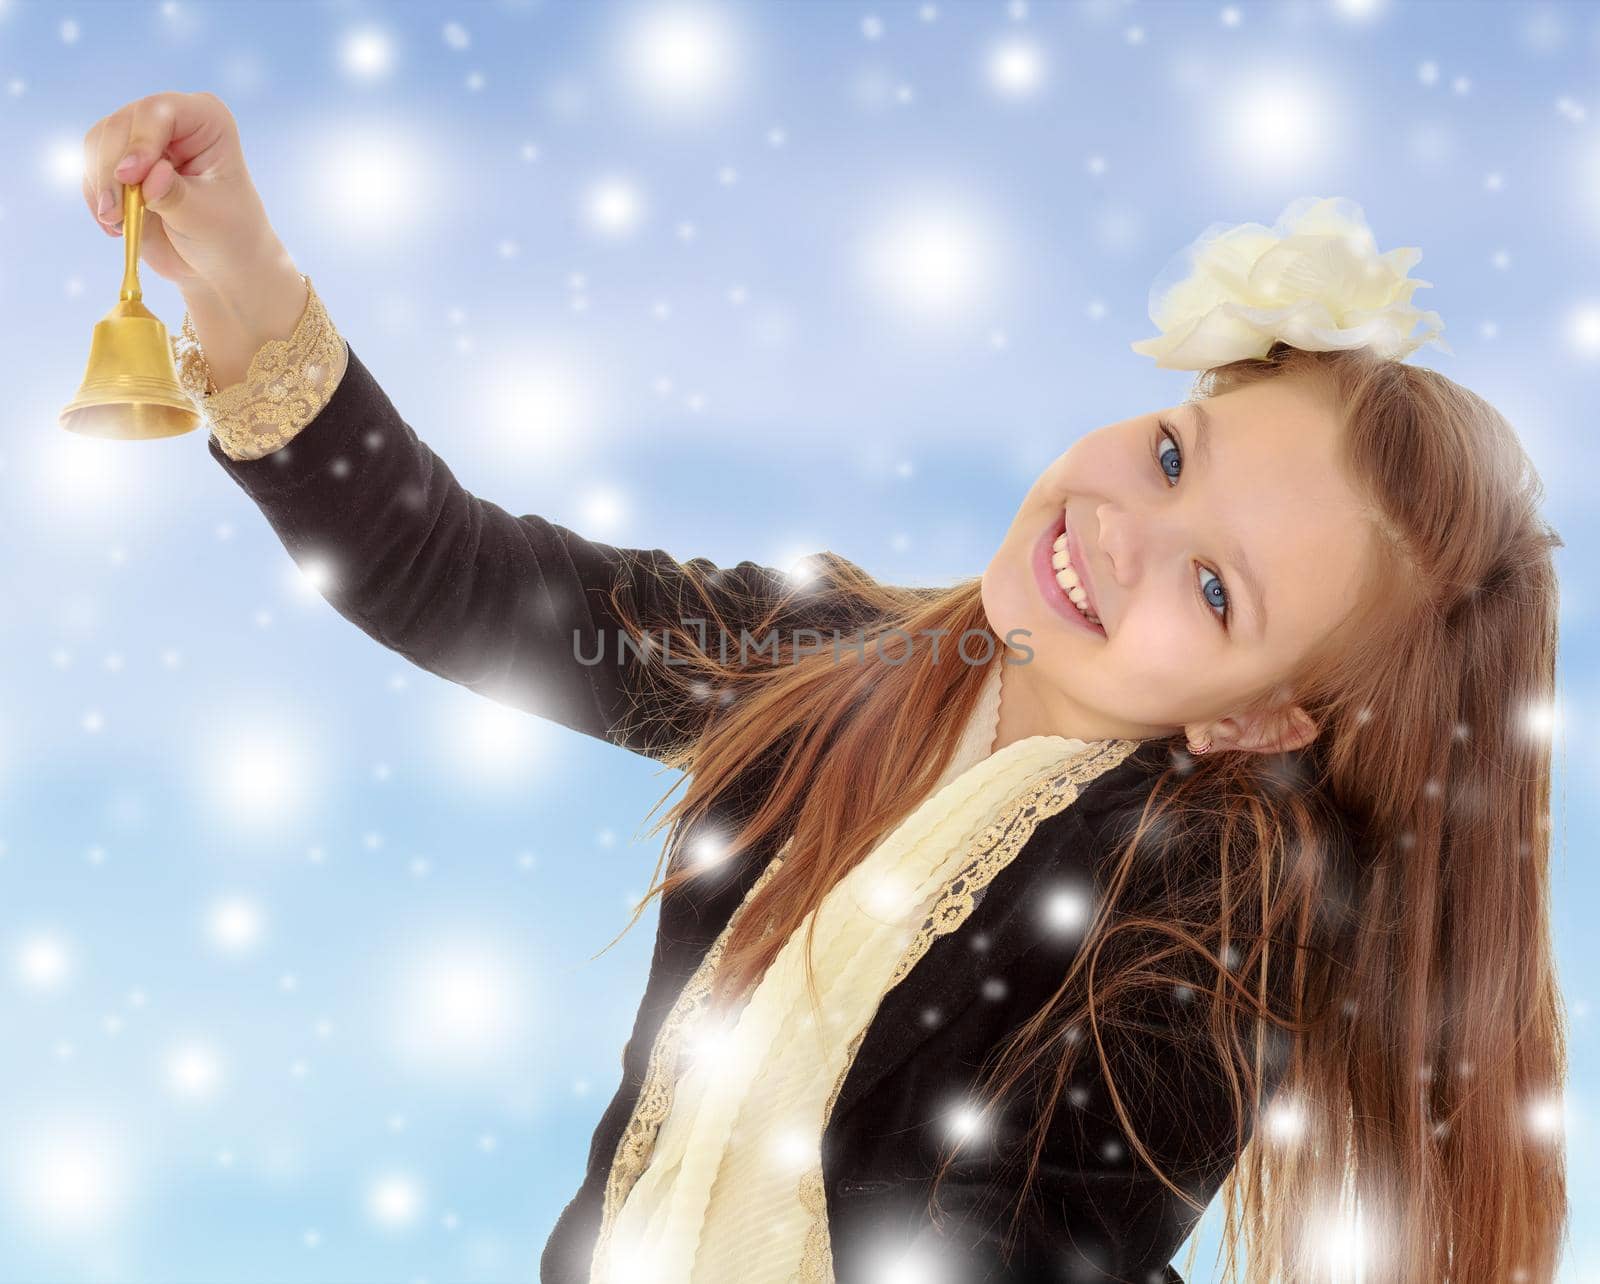 Joyful little long-haired girl with a white rose in her hair, rings the bell. Close-up.Blue Christmas background with white snowflakes.